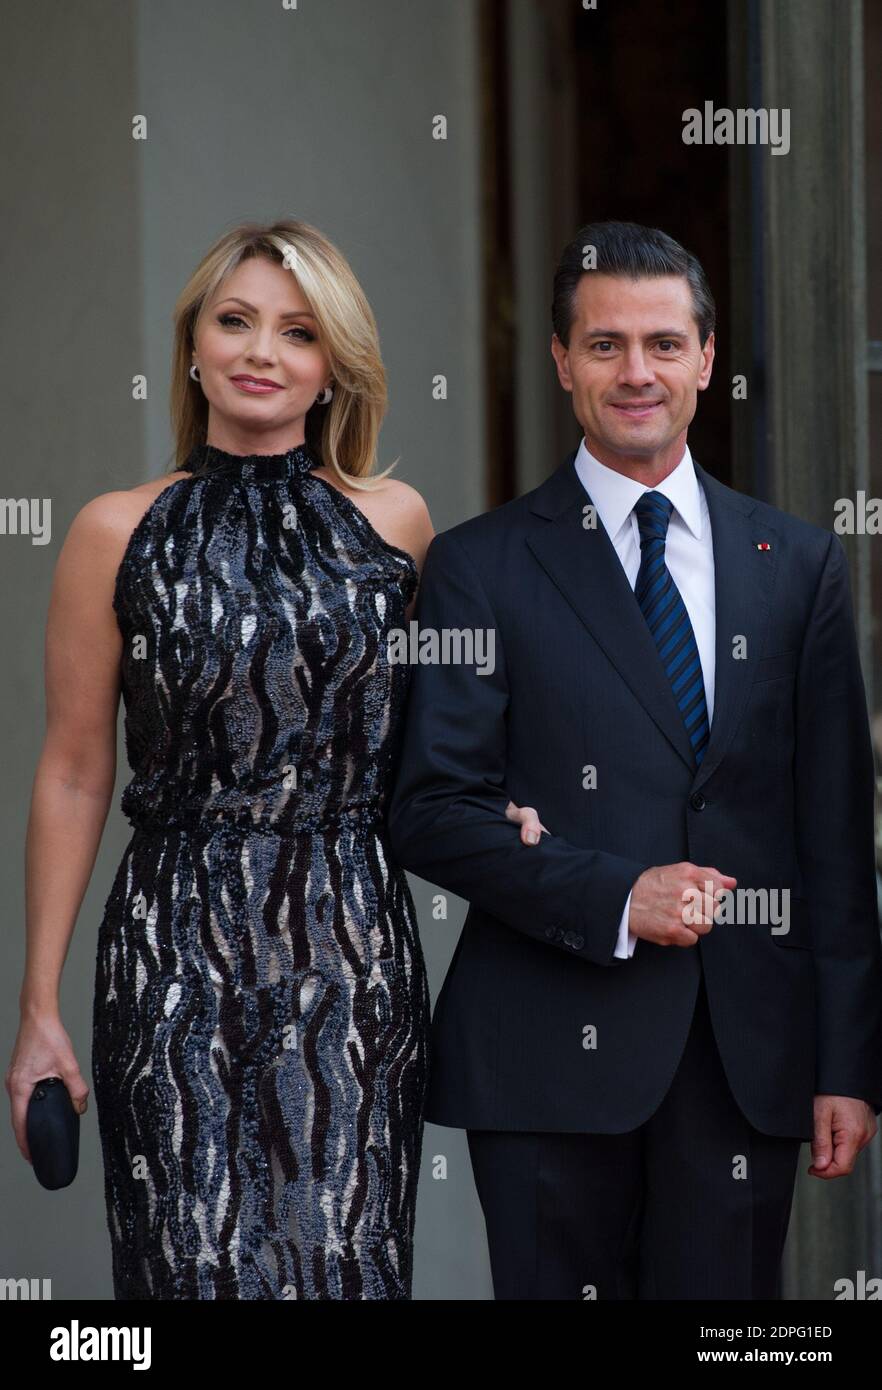 Mexican President Enrique Pena Nieto and his wife Angelica Rivera arriving for a state dinner hosted by French President Francois Hollande in their honor, at the Elysee Palace in Paris, France on July 16, 2015. President Pena Nieto is on four-day state visit to France. Photo by Thierry Orban/ABACAPRESS.COM Stock Photo